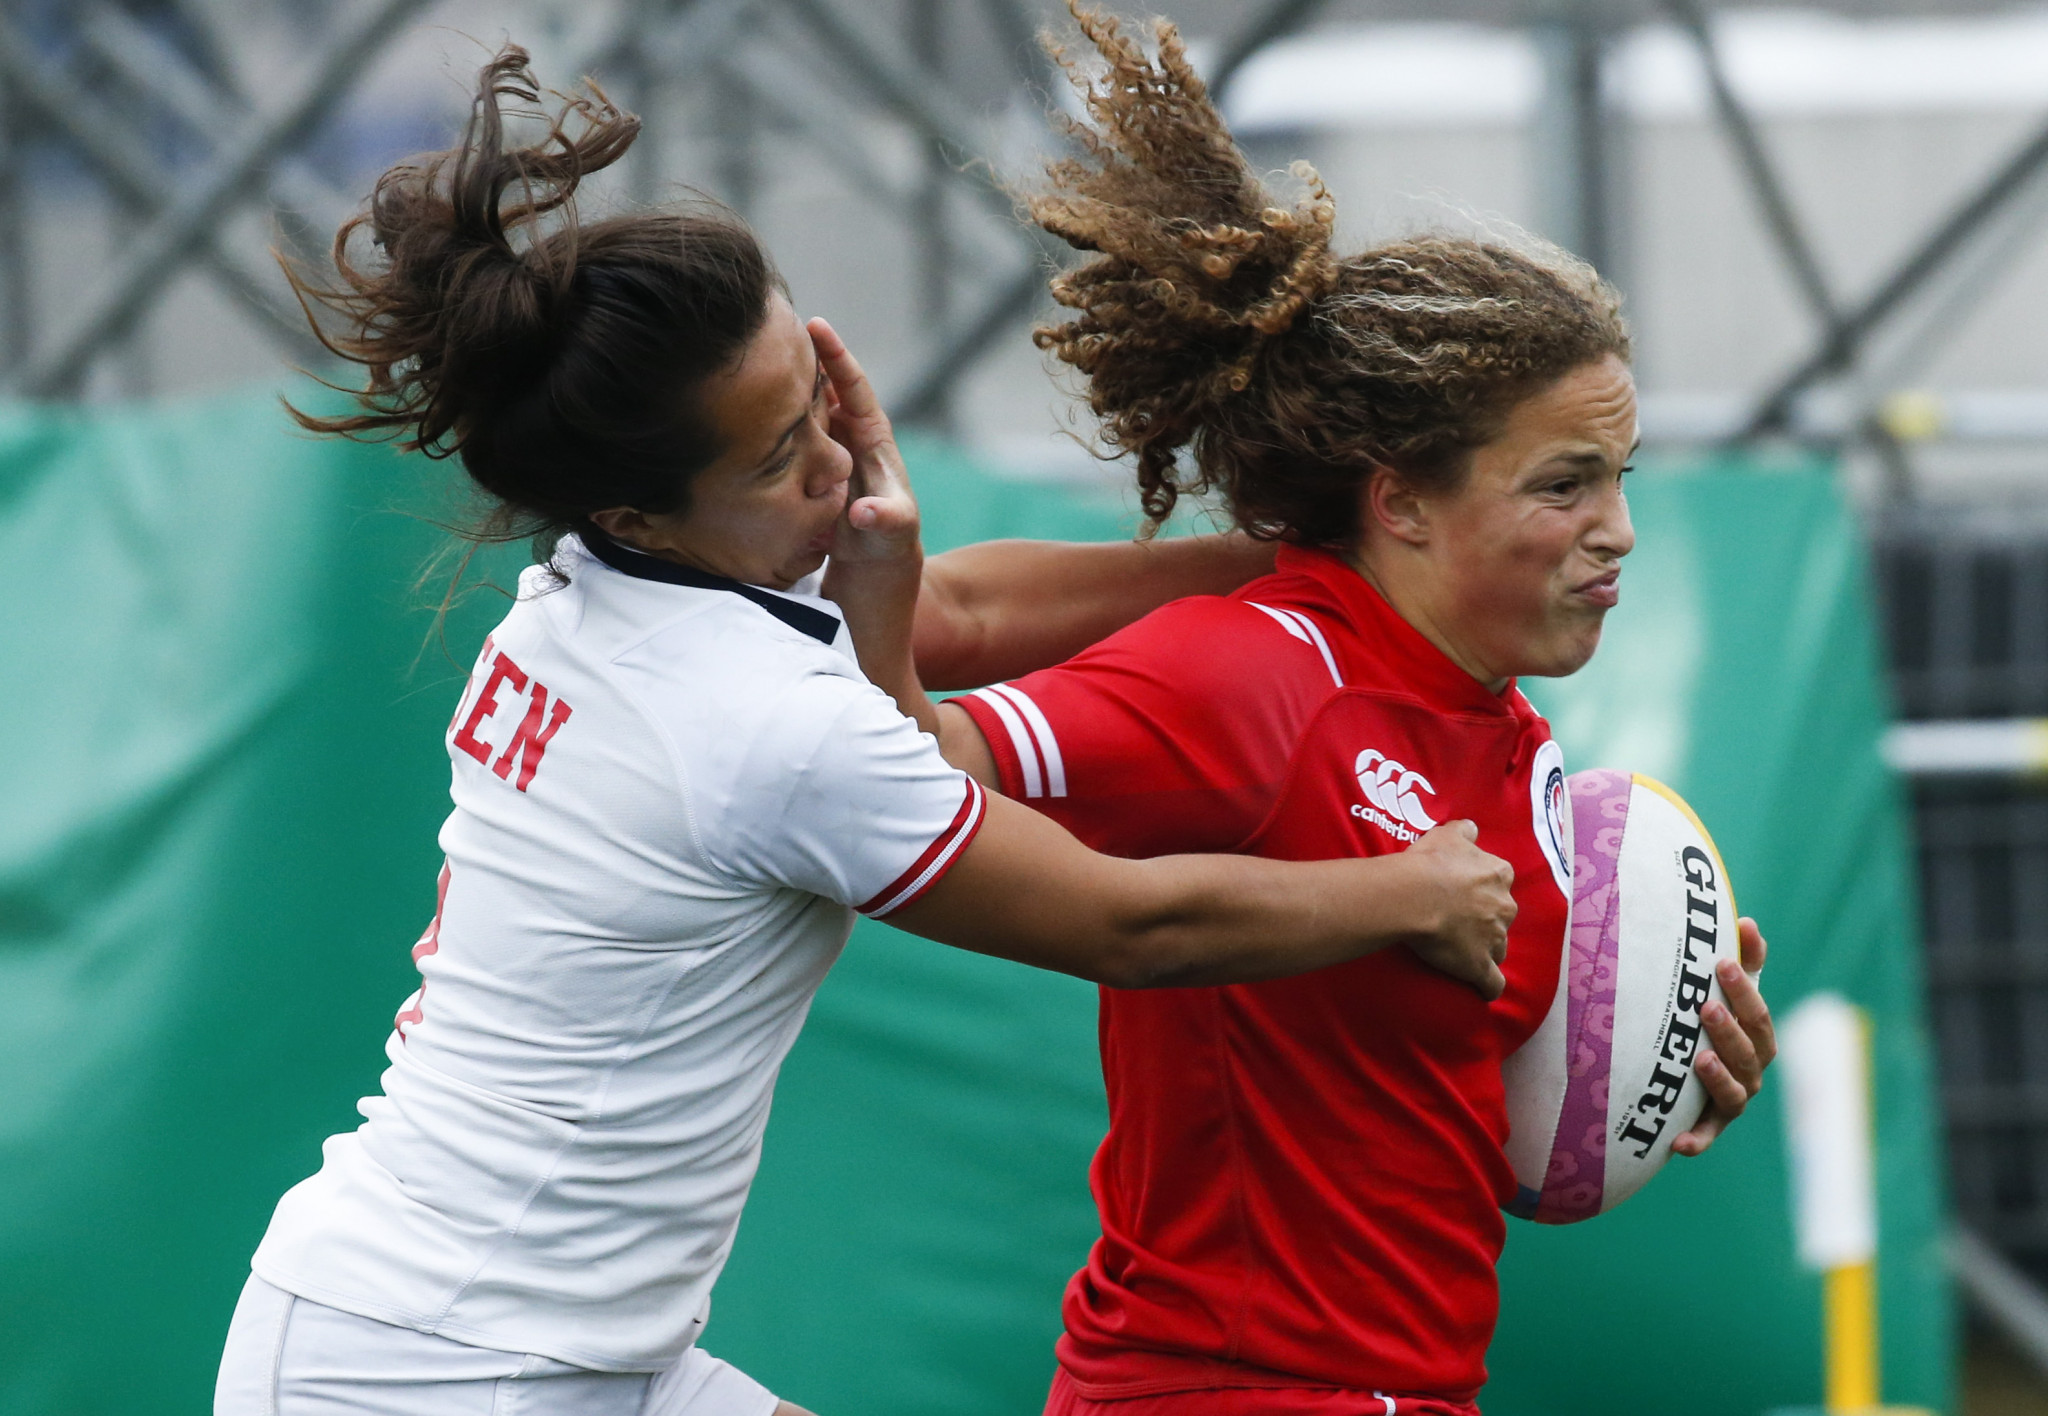 Canada had joy in the women's final, defeating the US to triumph ©Lima 2019